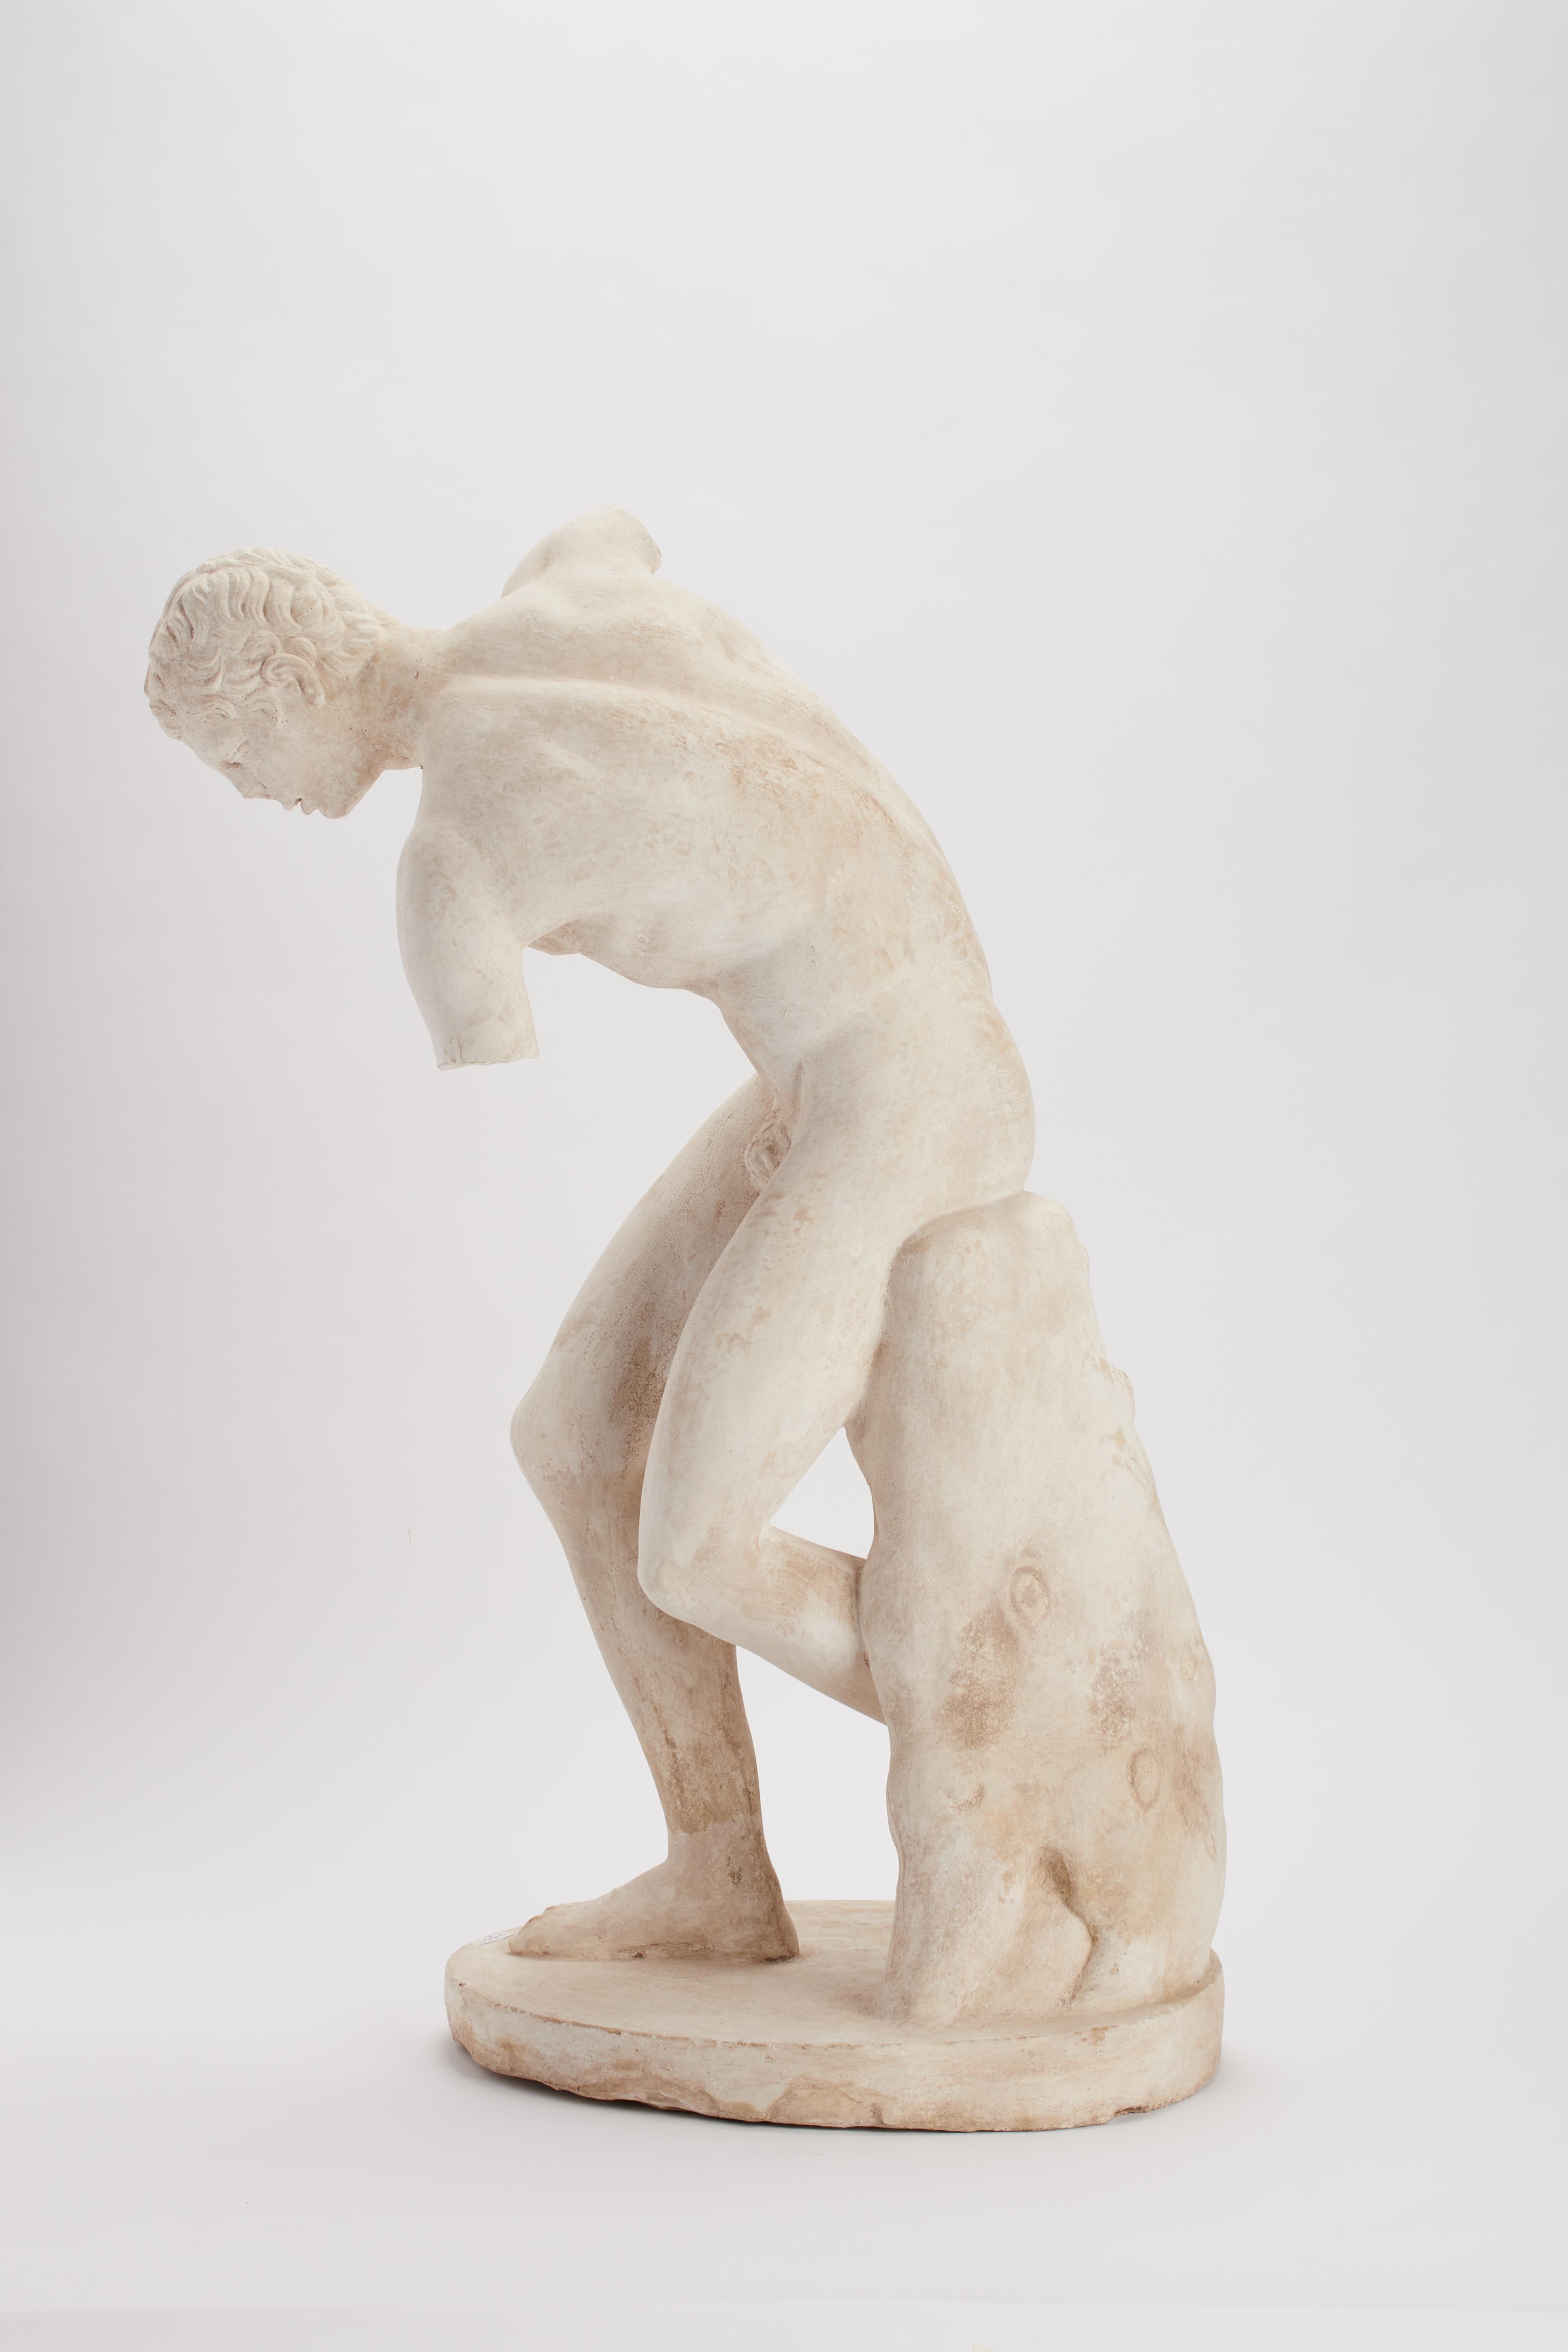 Italian Academic Cast Depicting a Discus Thrower, Italy, 1890